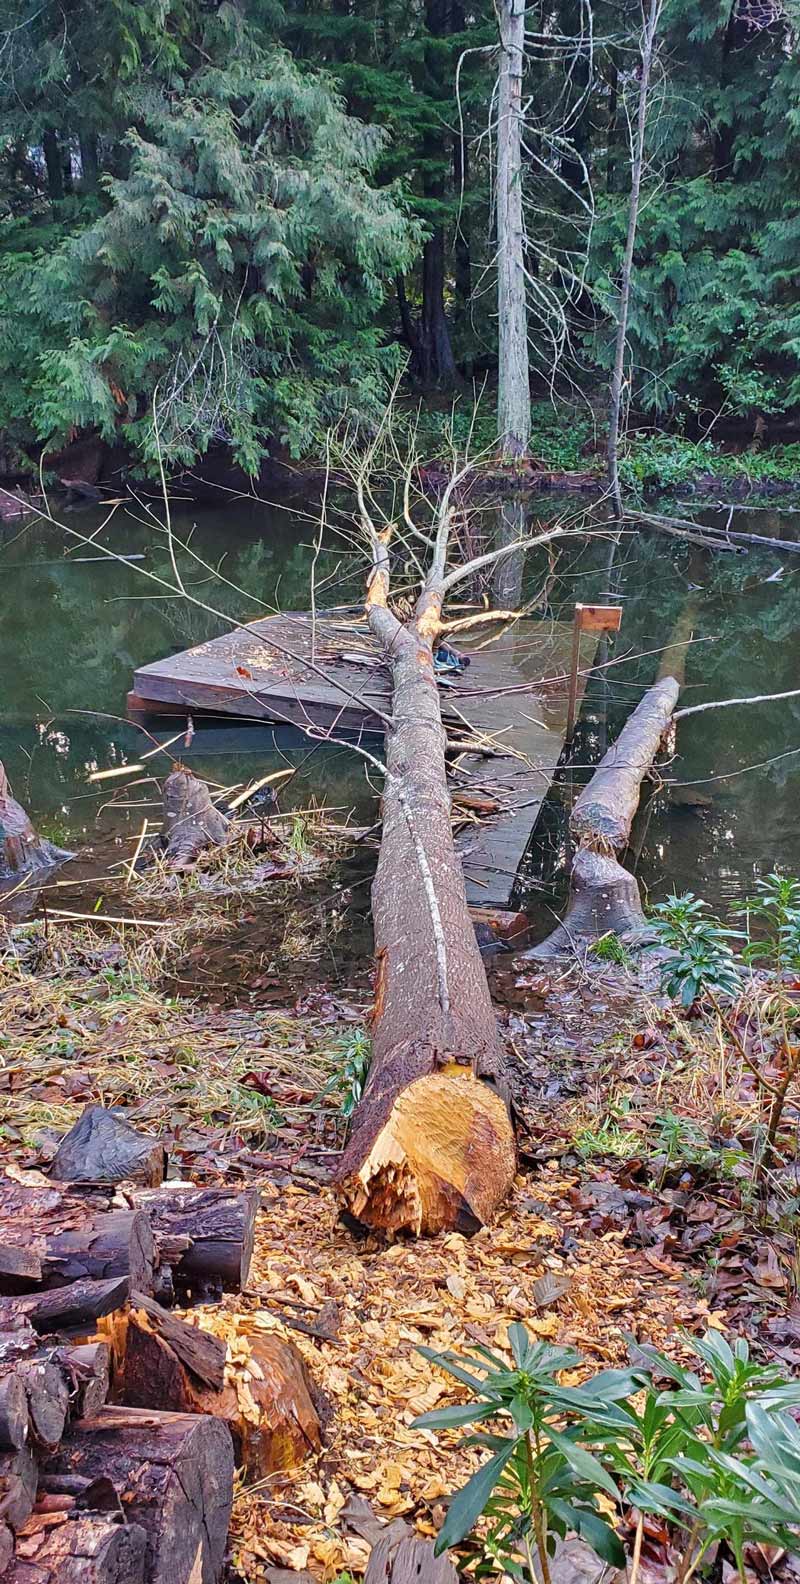 Cool Stuff: The local beaver has retaliated after his dam was removed